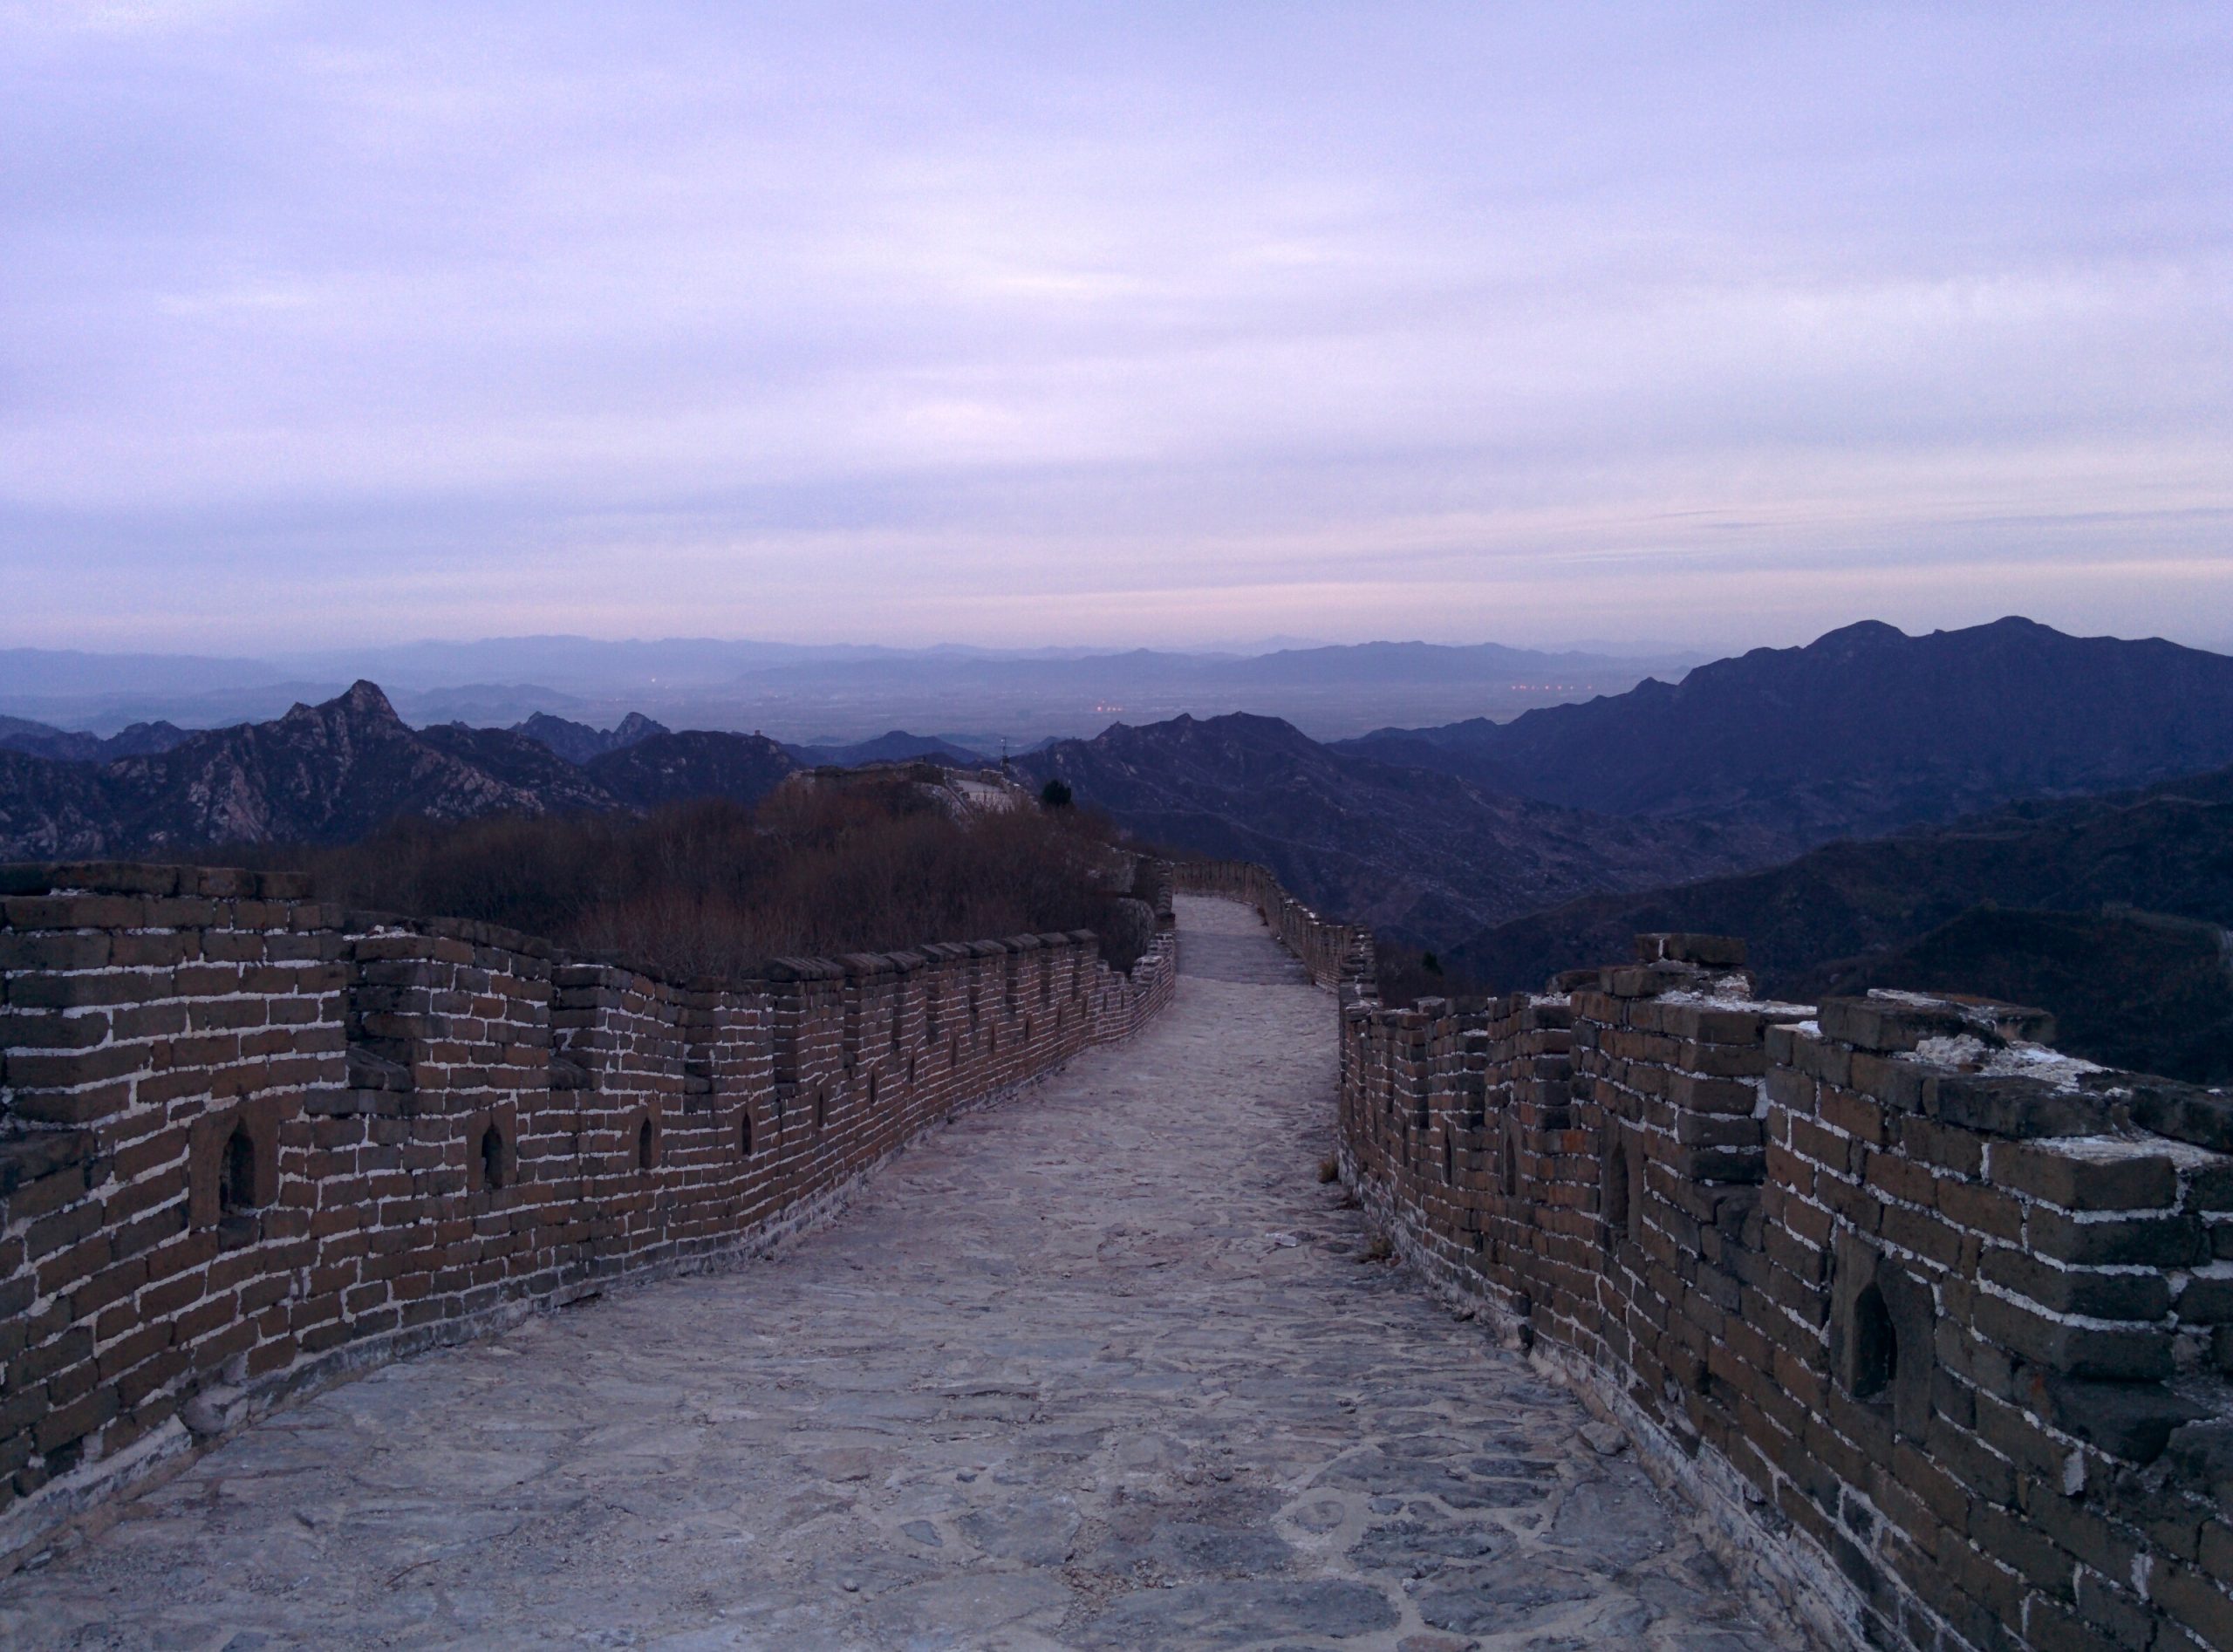 China: My Overnight Stay at The Great Wall